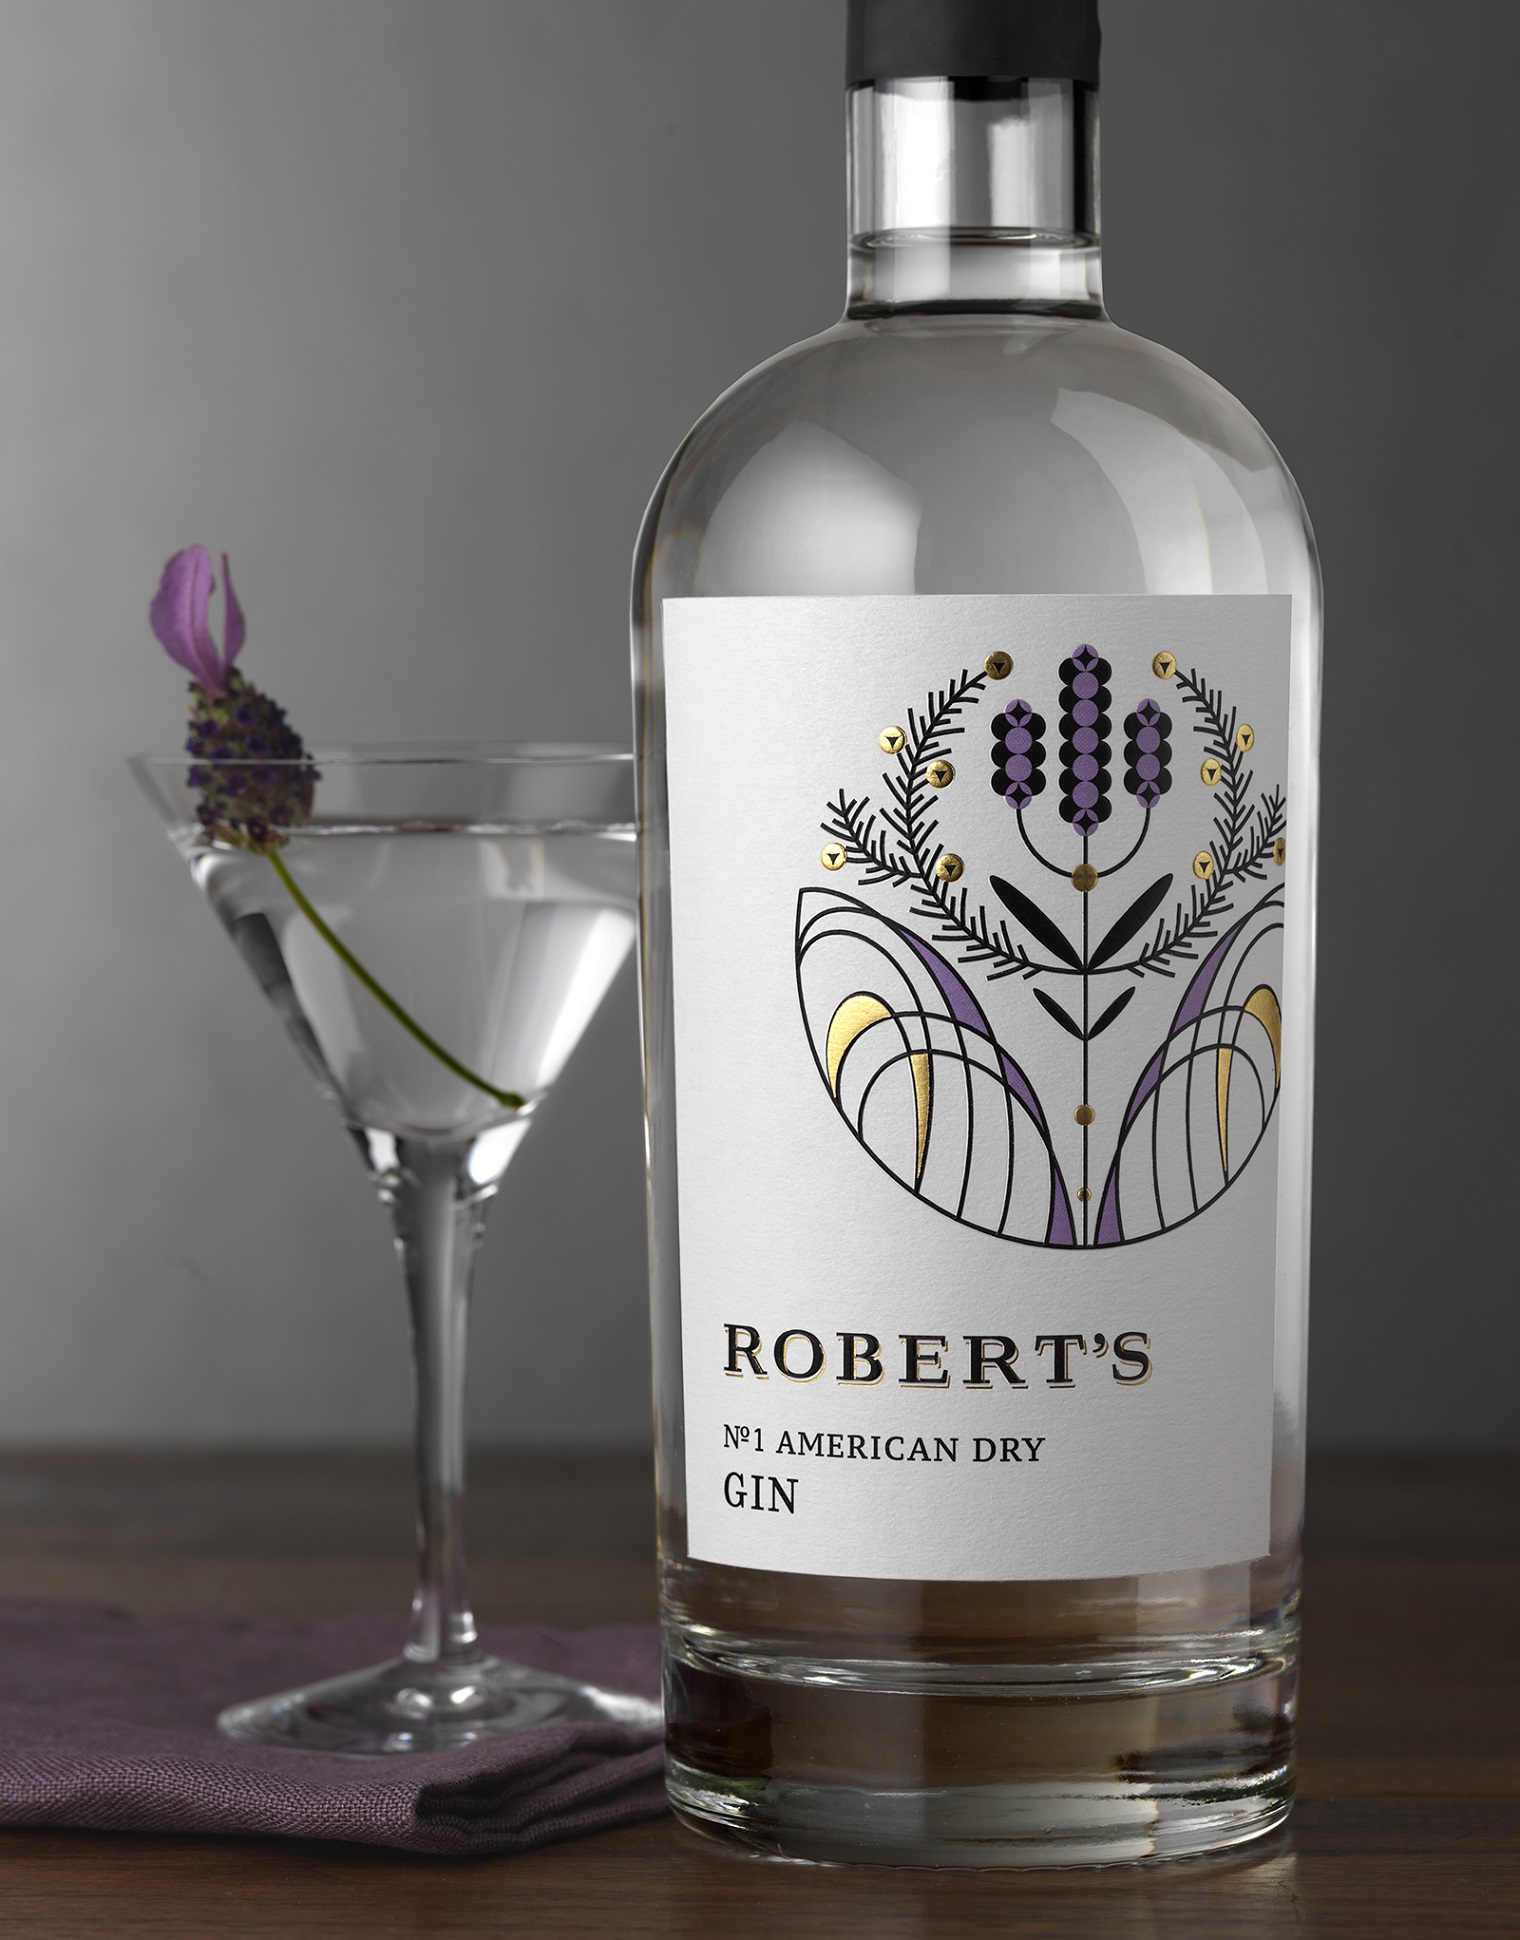 CF Napa Helps Launch Series of New Age Gins